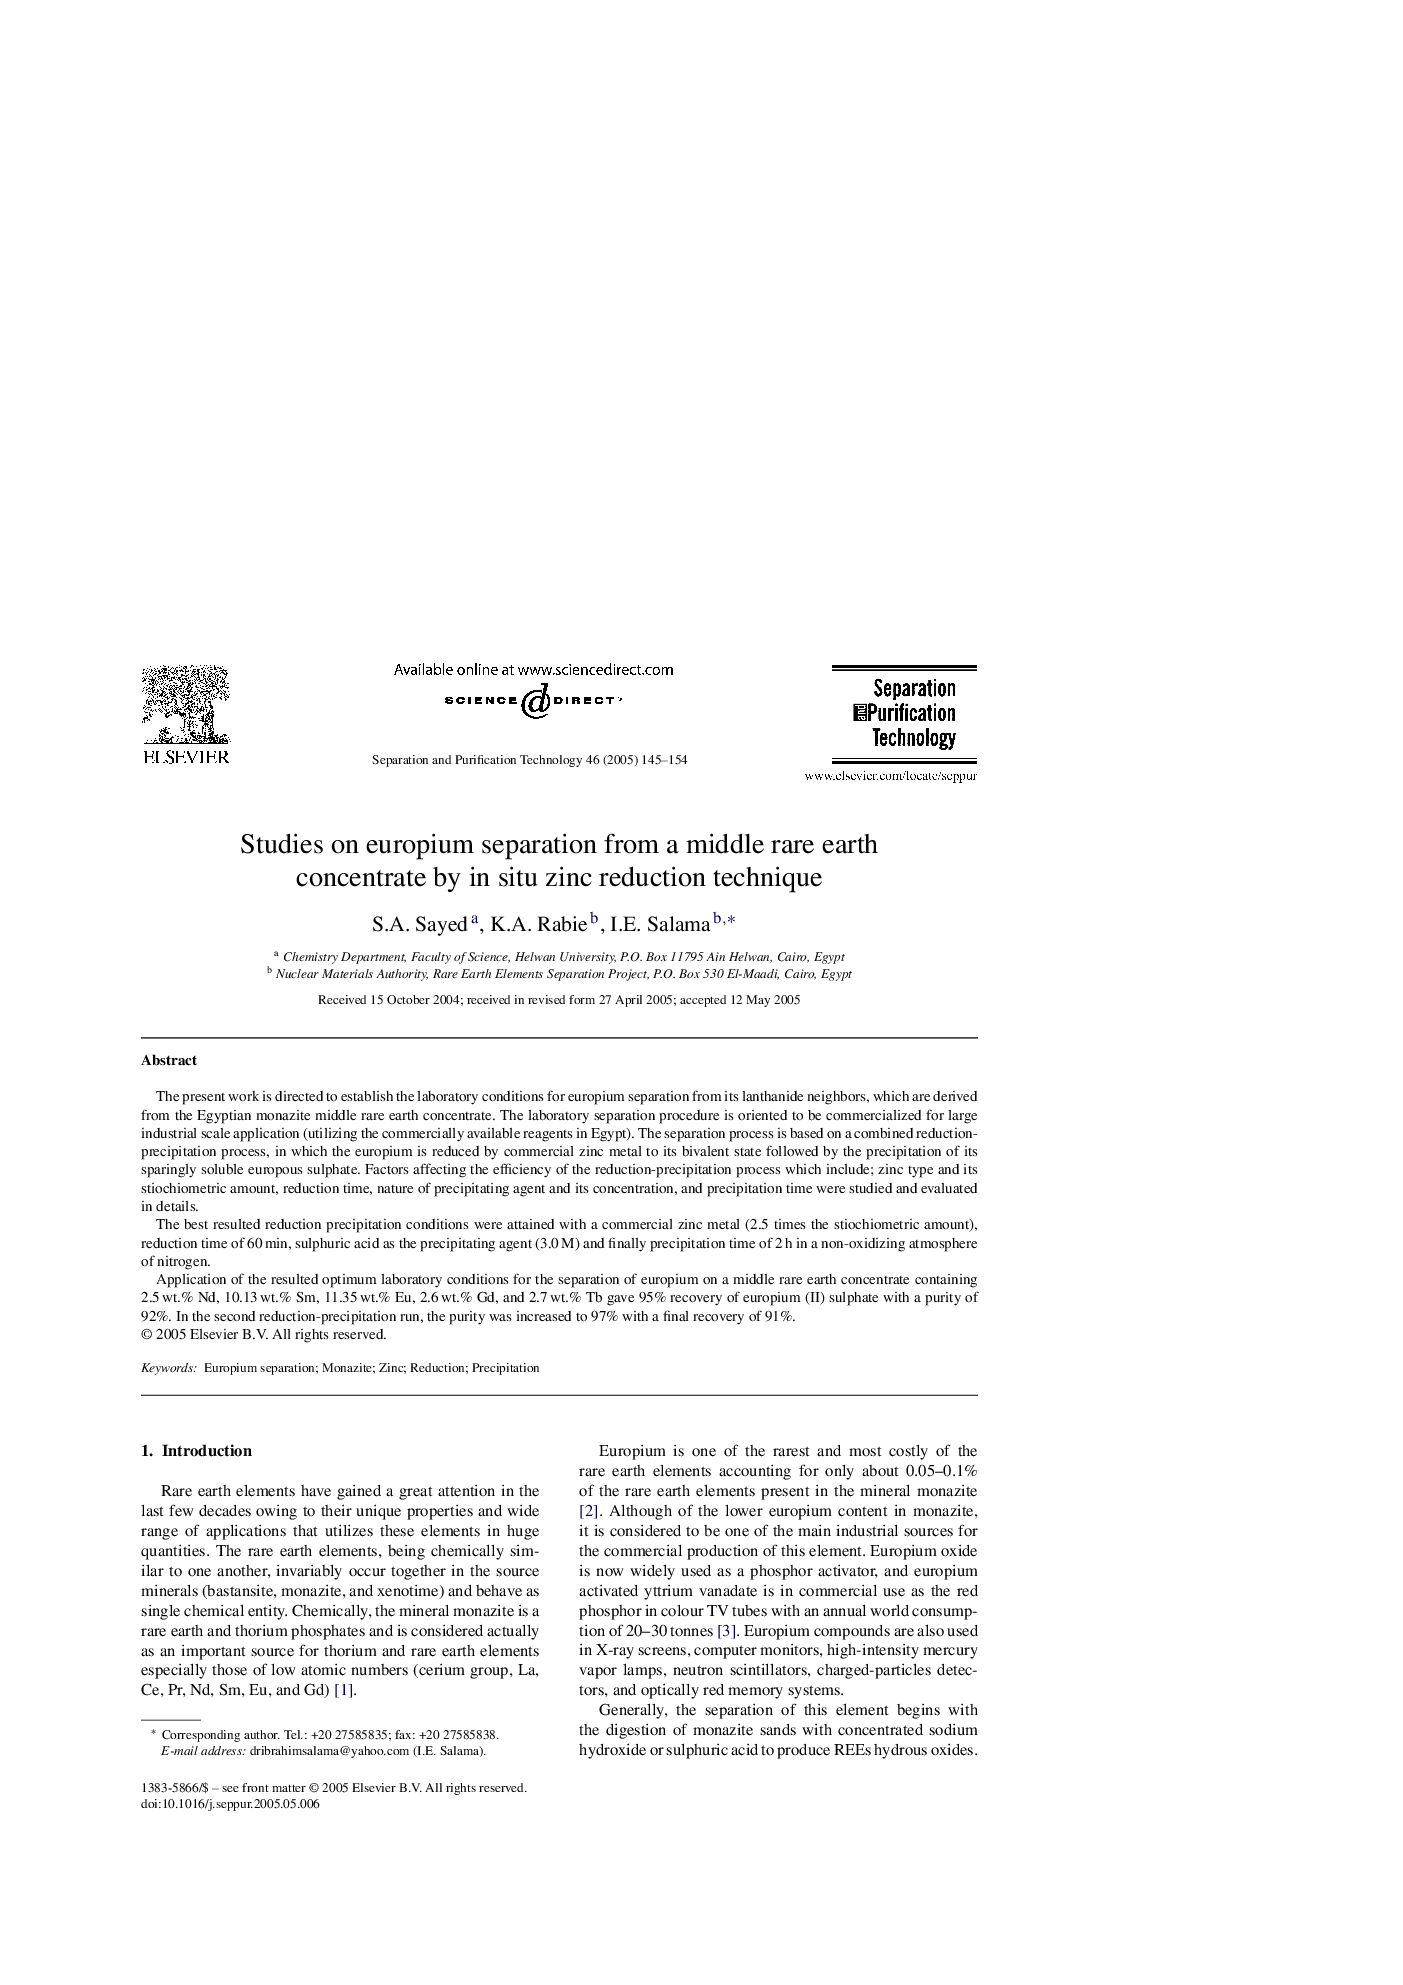 Studies on europium separation from a middle rare earth concentrate by in situ zinc reduction technique